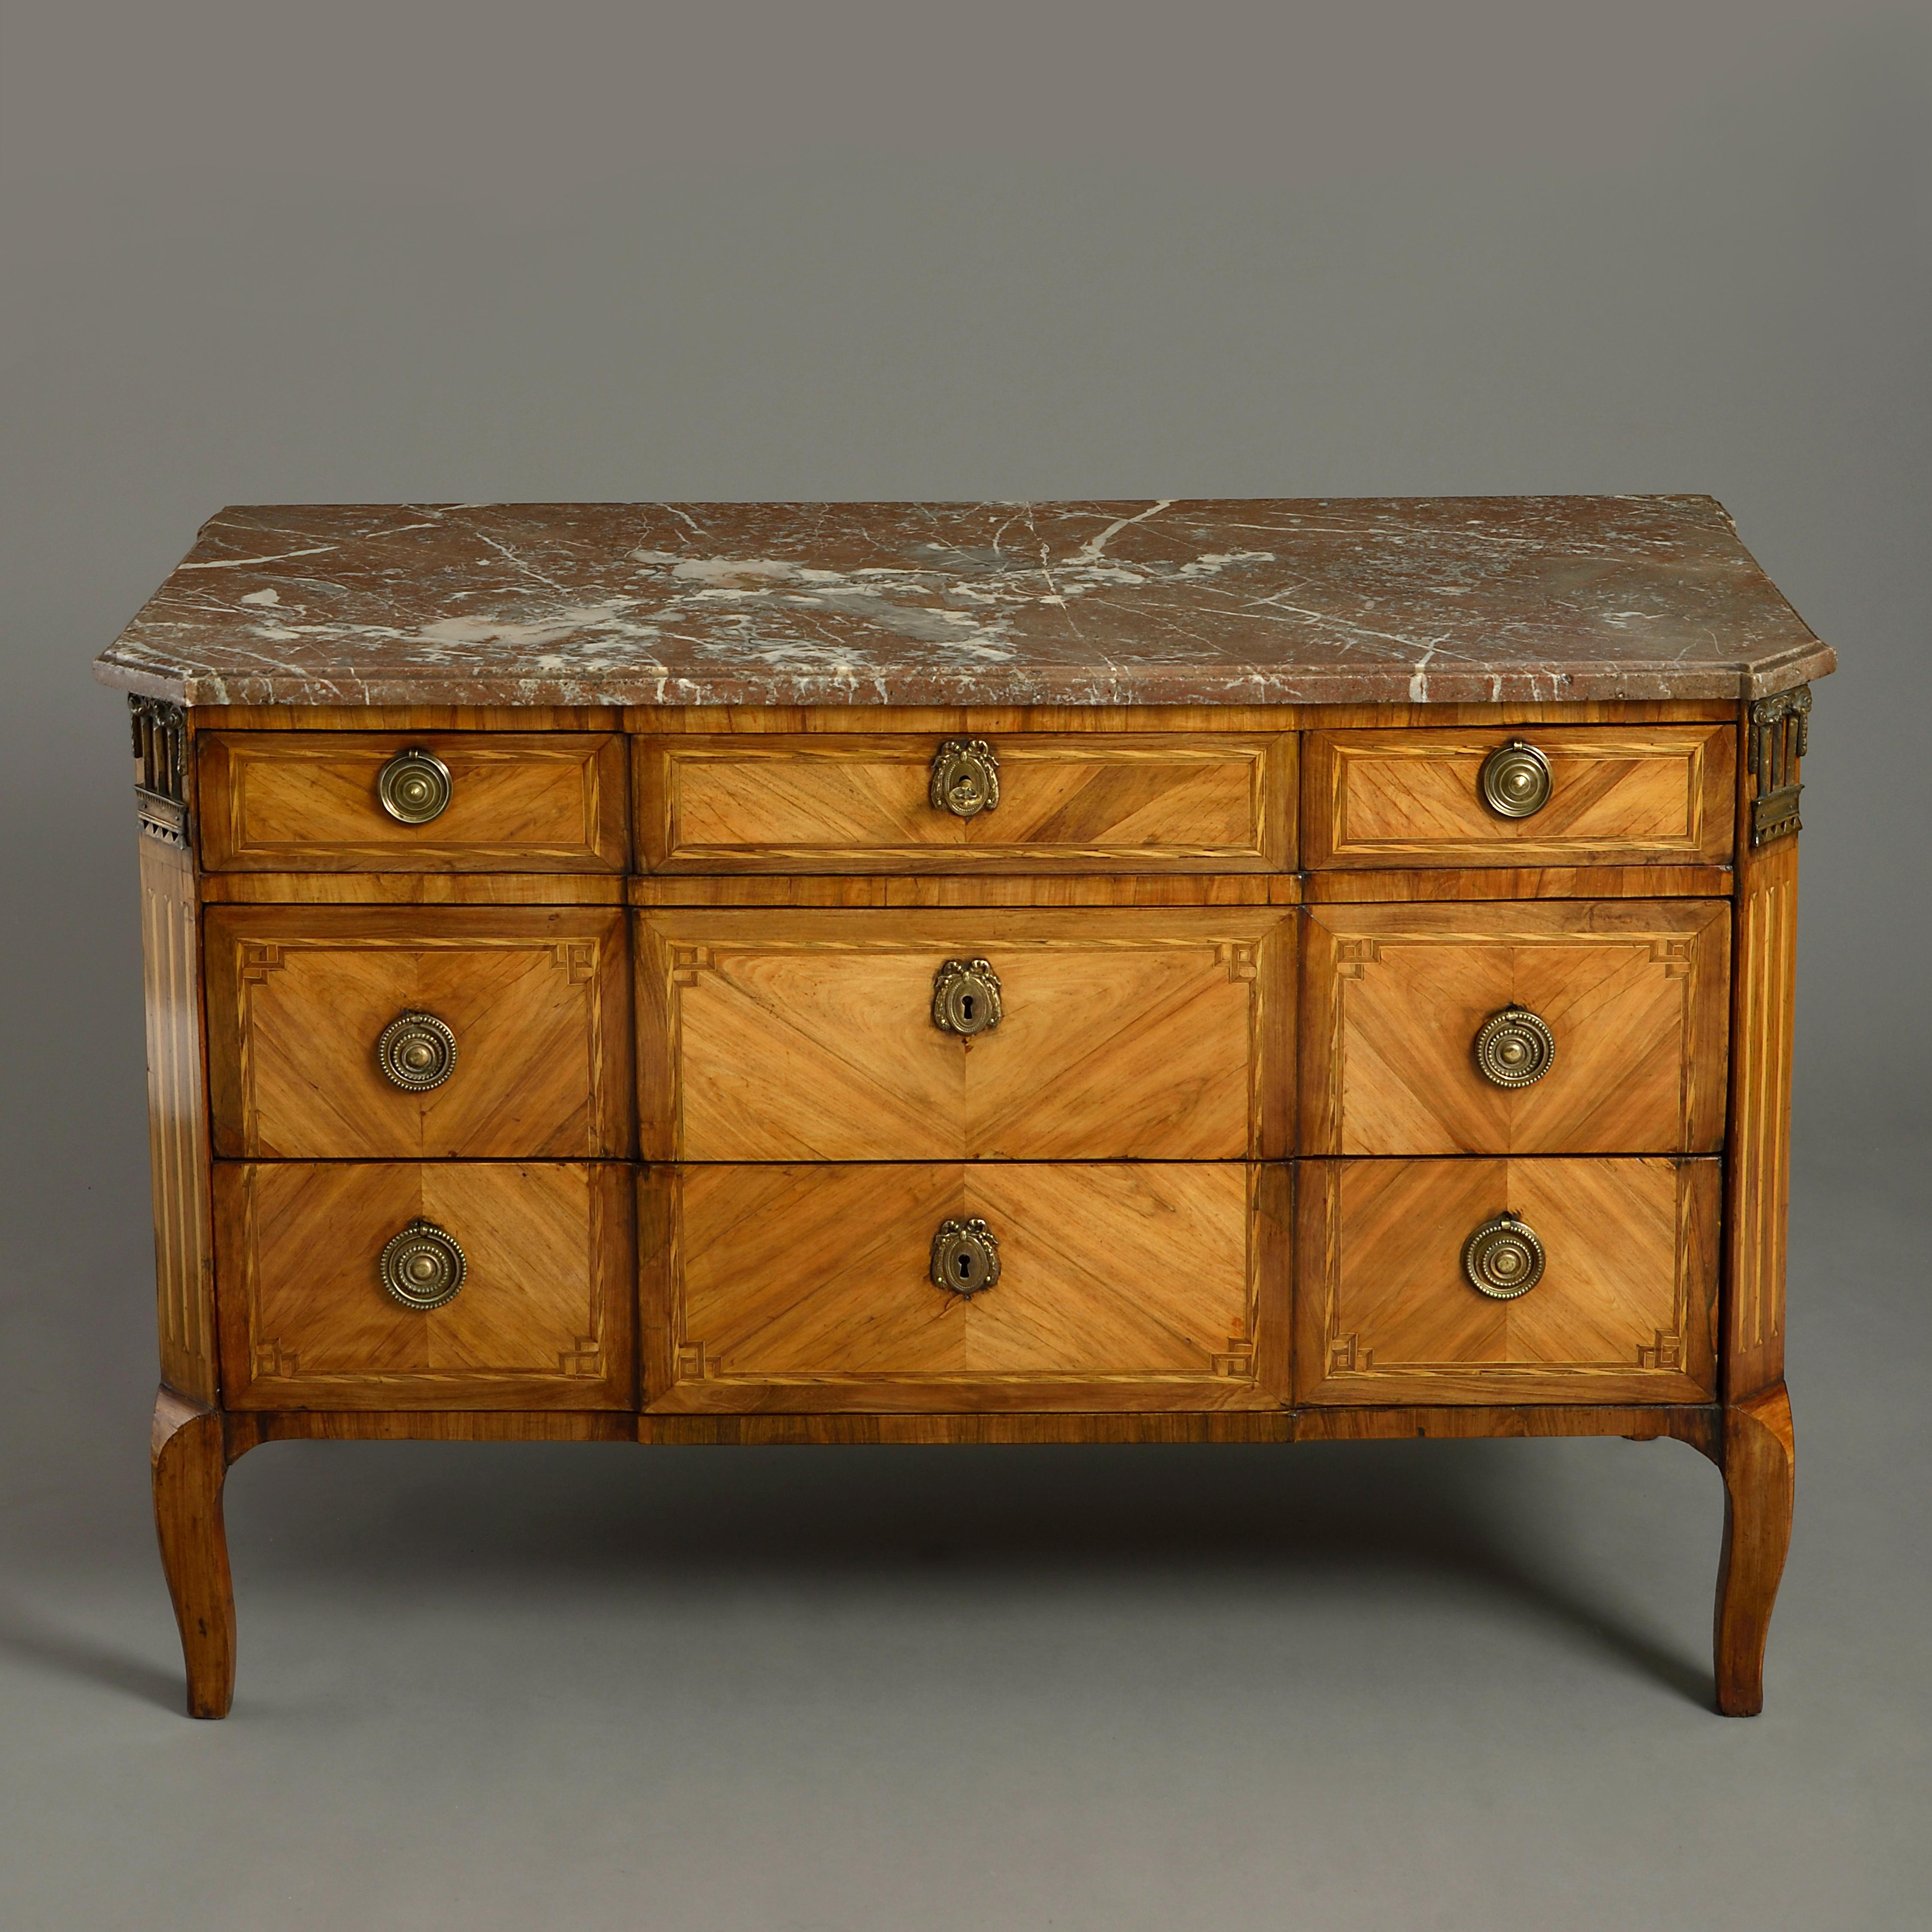 A mid-18th century Transitional Louis XVI Period parquetry commode, having a marble top above three short and two long drawers, veneered in tulipwood and sabicu and raised on cabriole legs.

    